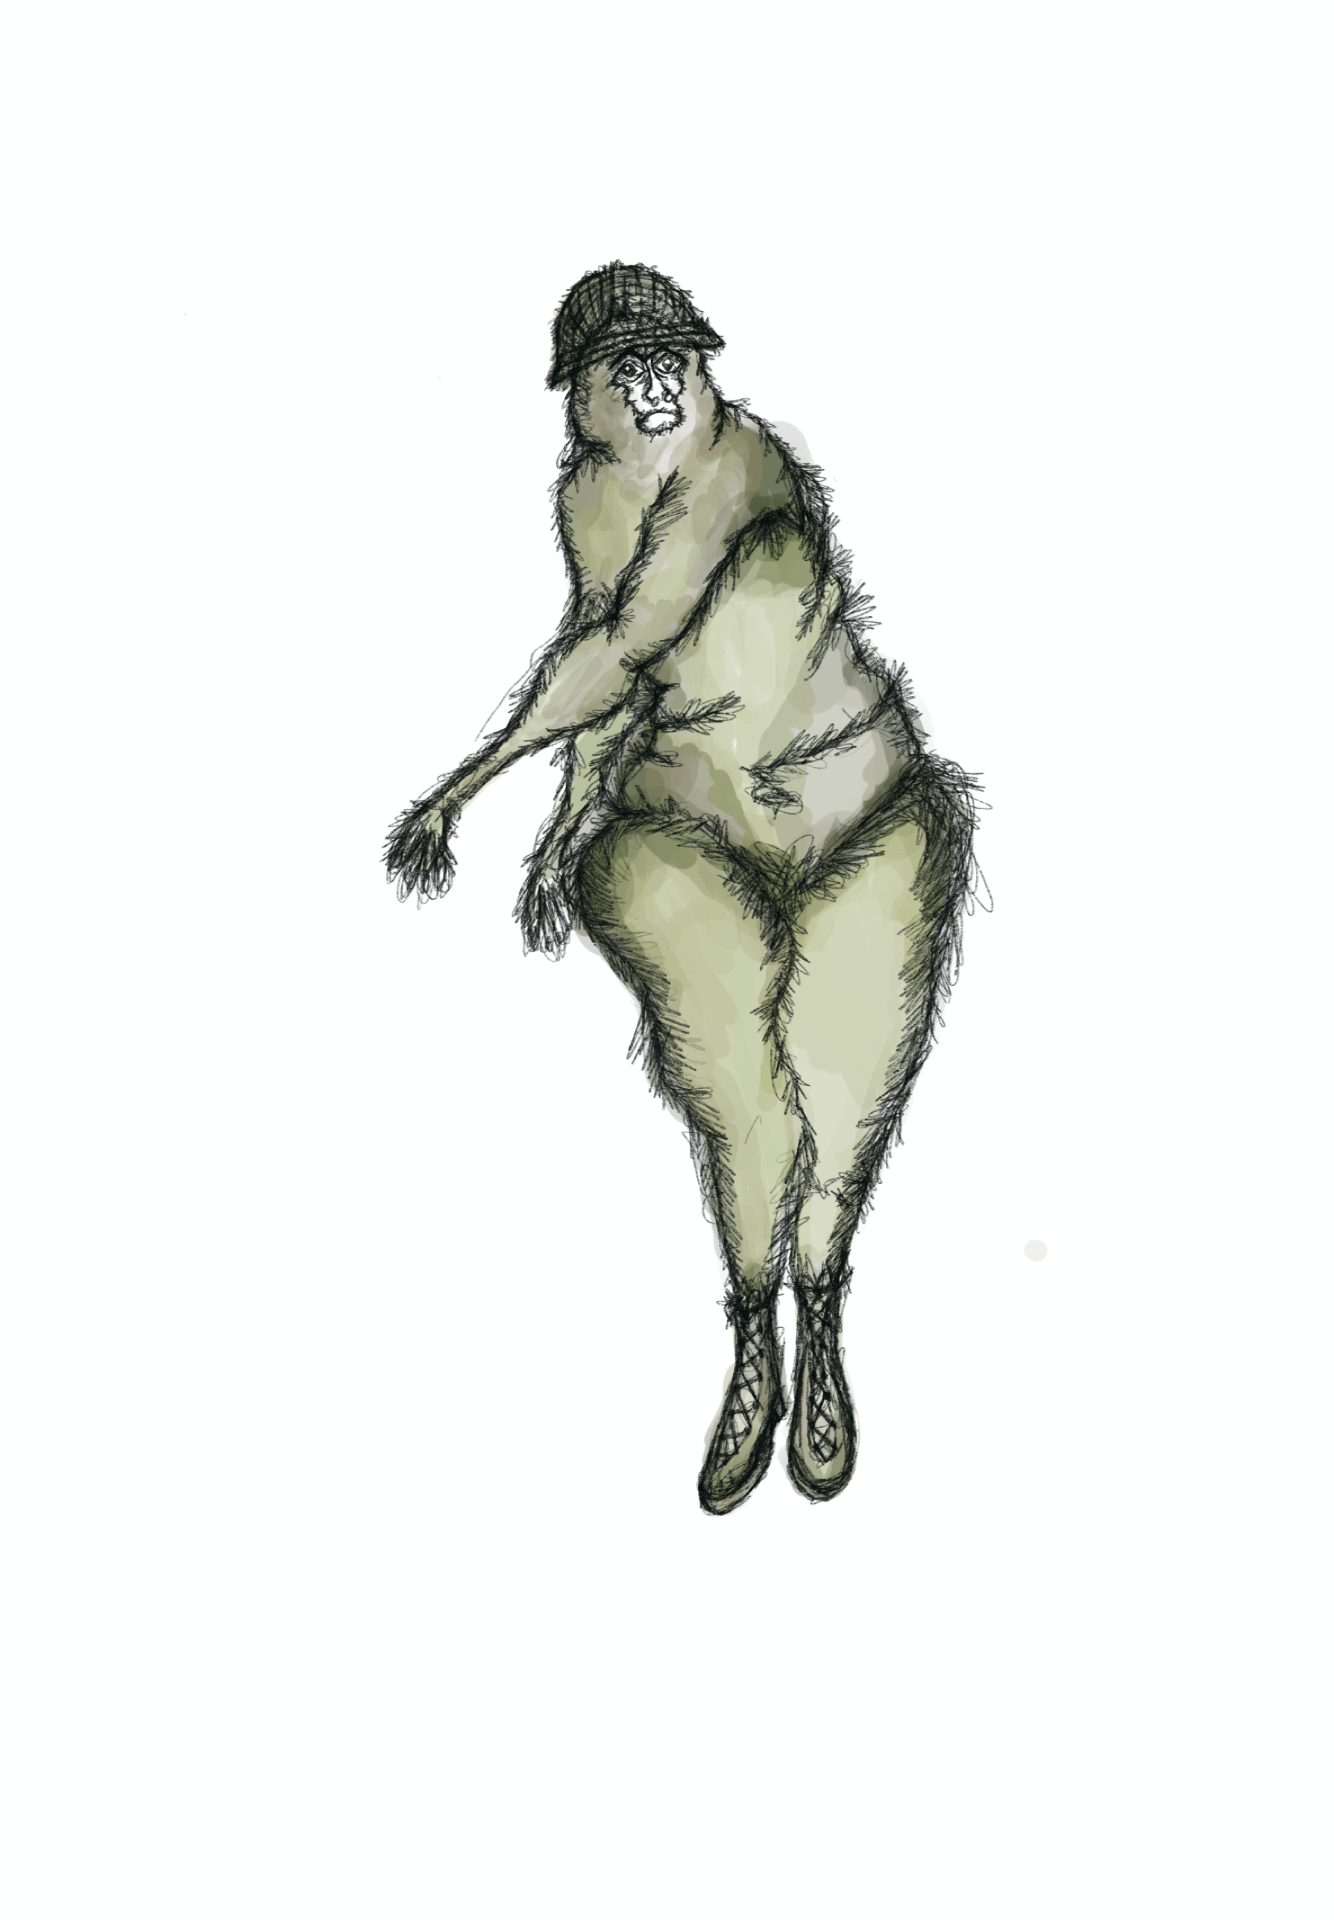 Digital drawing of a Barbary macaque stood upright with one arm across its body, wearing an army helmet and boots